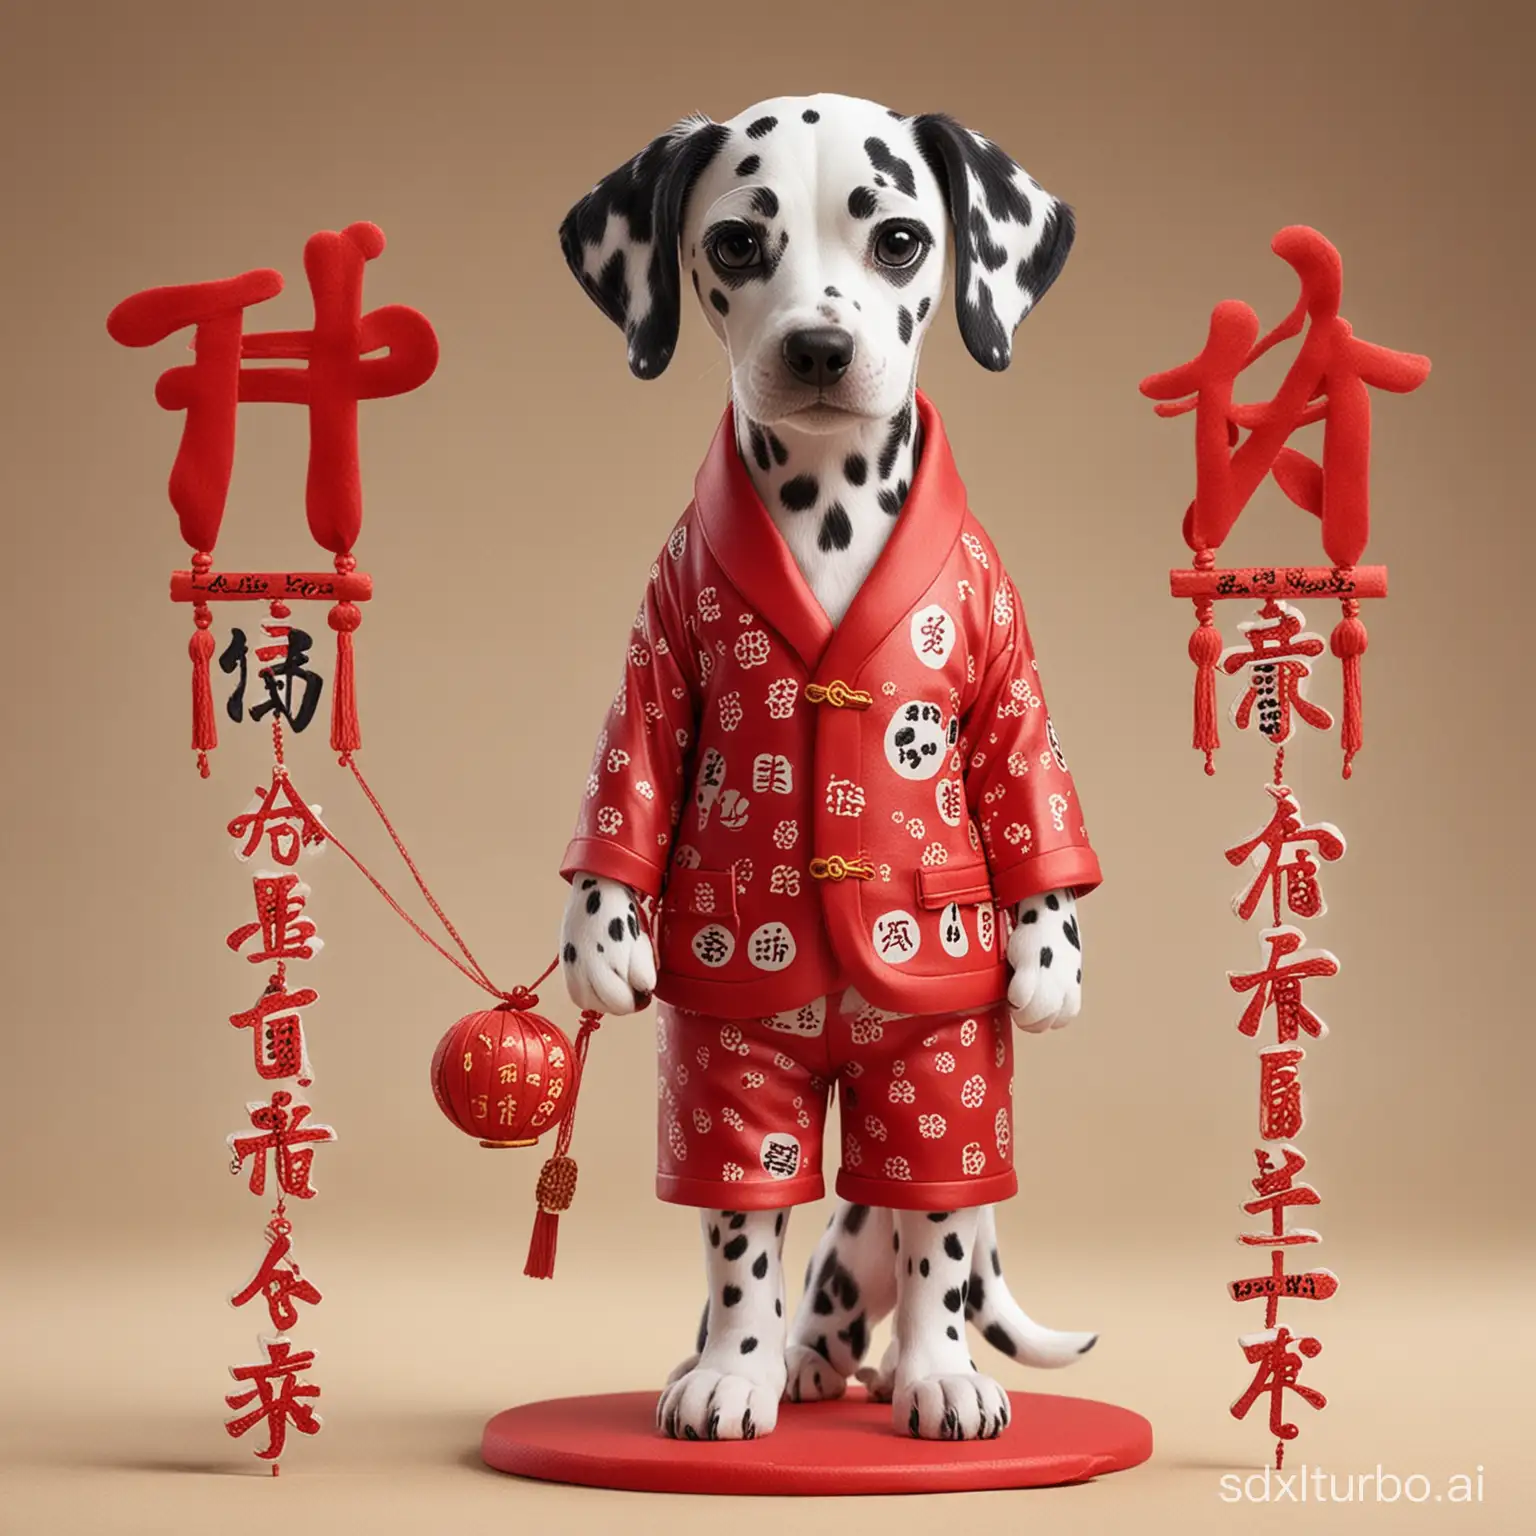 a cute Dalmatian wearing a red suit with a Chinese word"FU",pasting the coupletsgood fortune